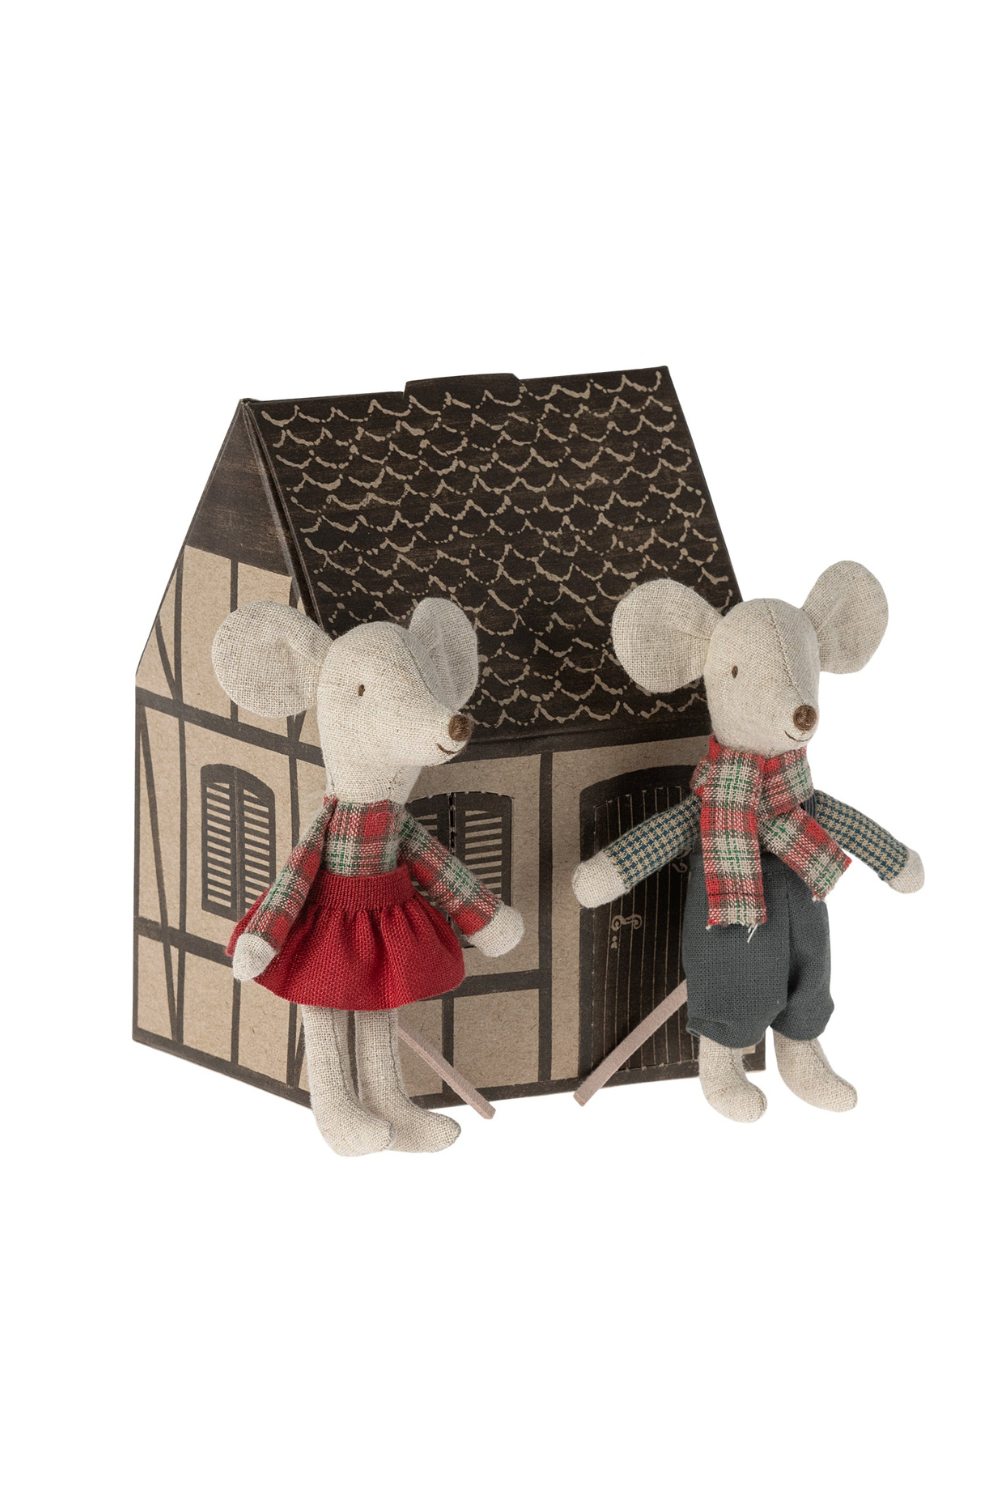 Winter Mice Twins: Little Brother & Sister Maileg Collectibles